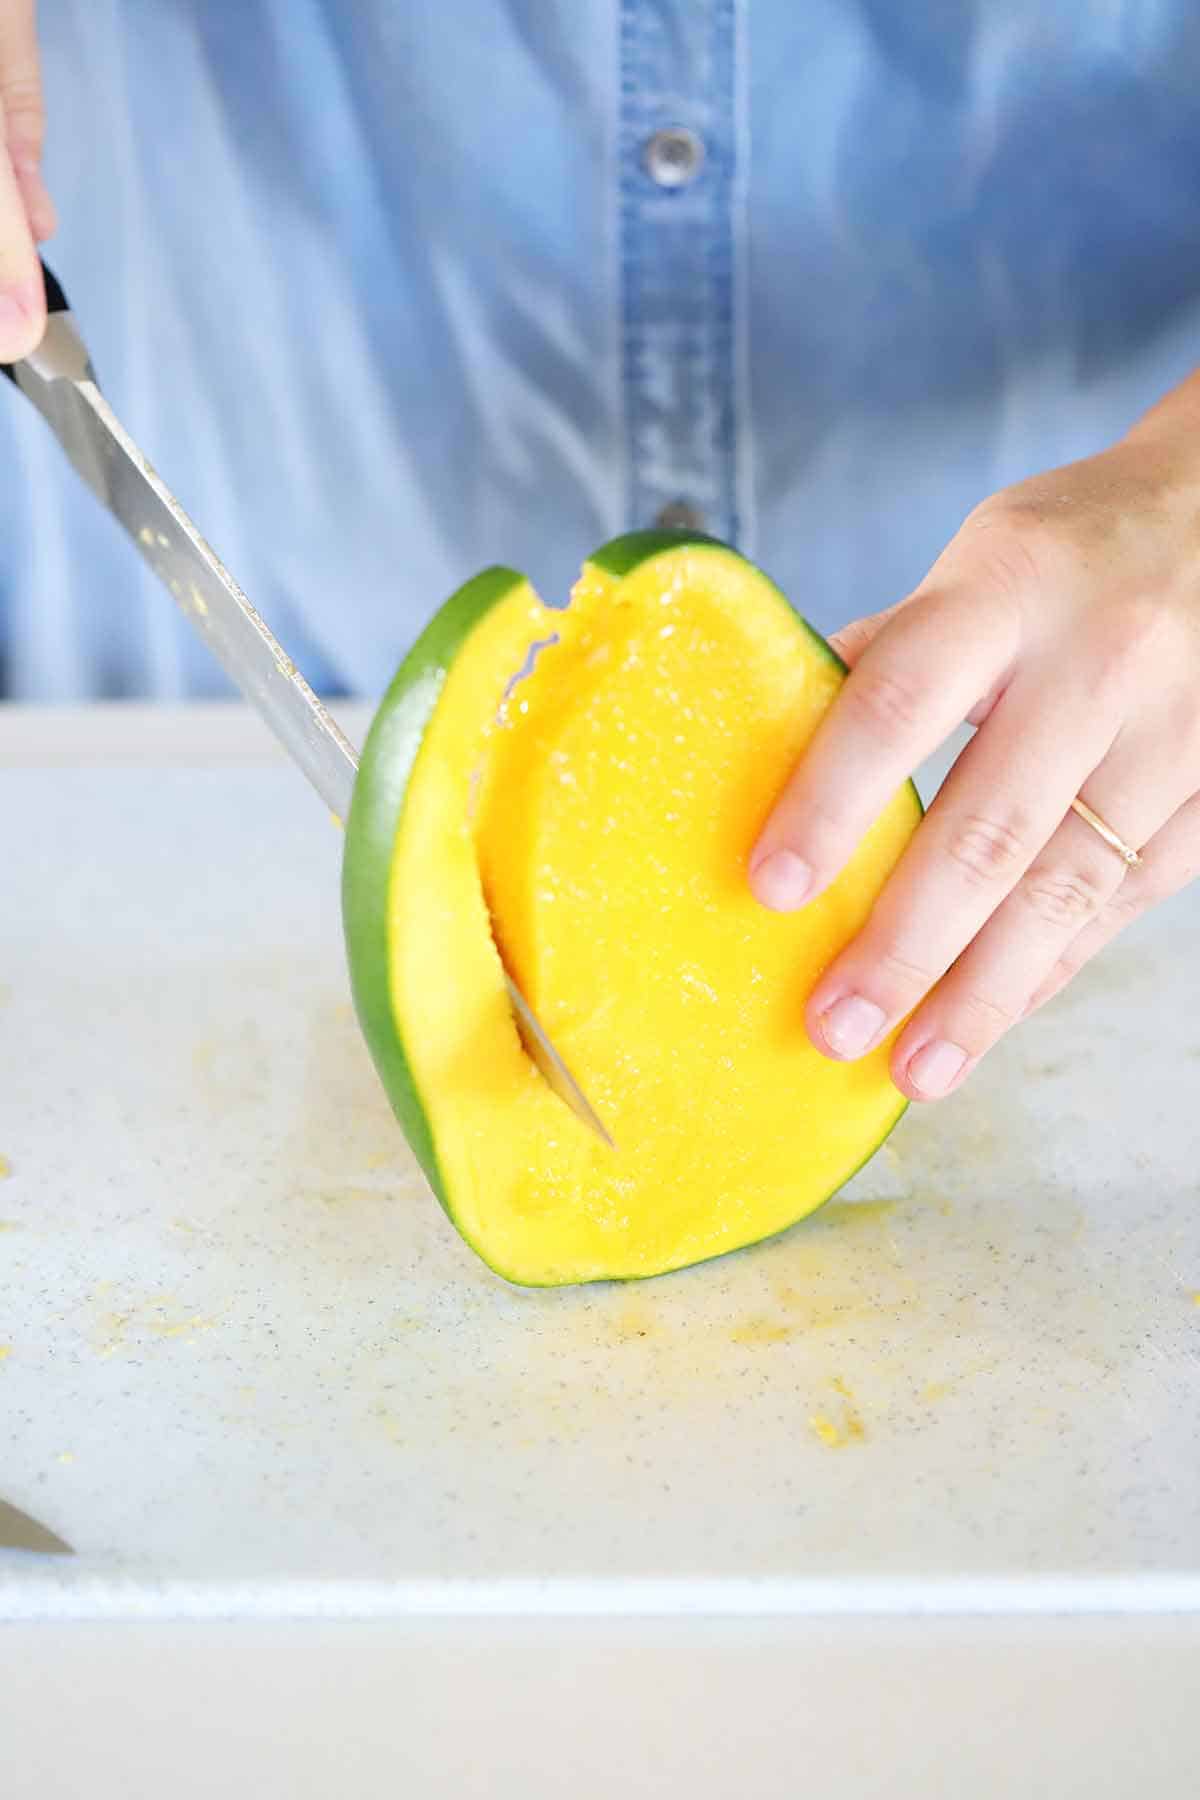 How To Cut A Mango Two Easy Ways Bowl Of Delicious,How Much Do Horses Cost To Buy